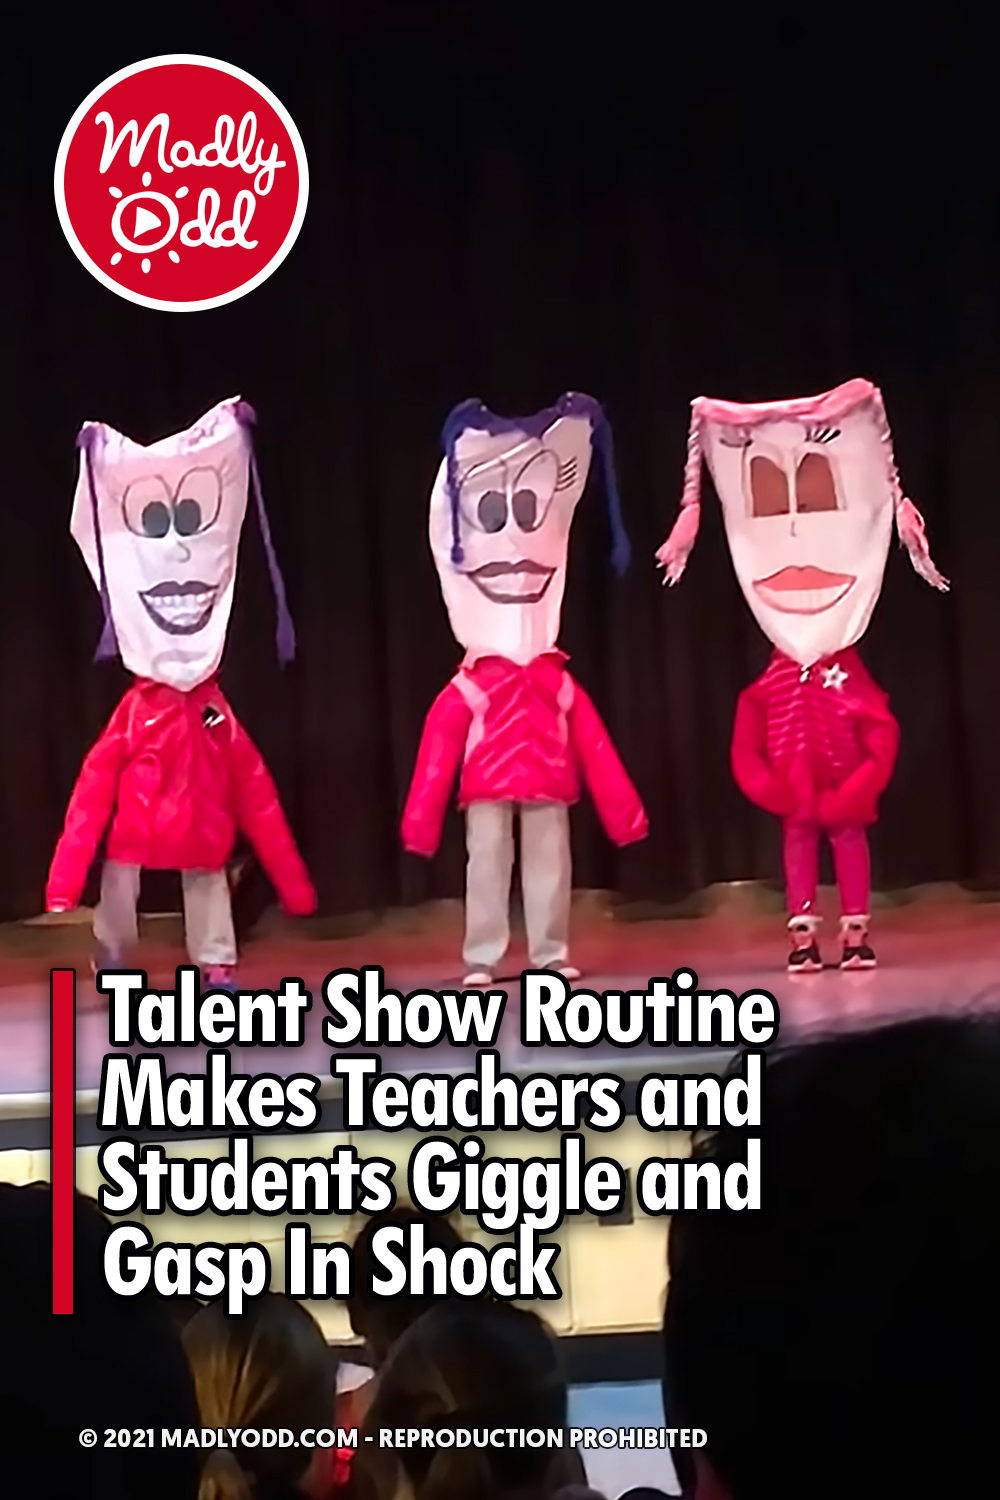 Talent Show Routine Makes Teachers and Students Giggle and Gasp In Shock